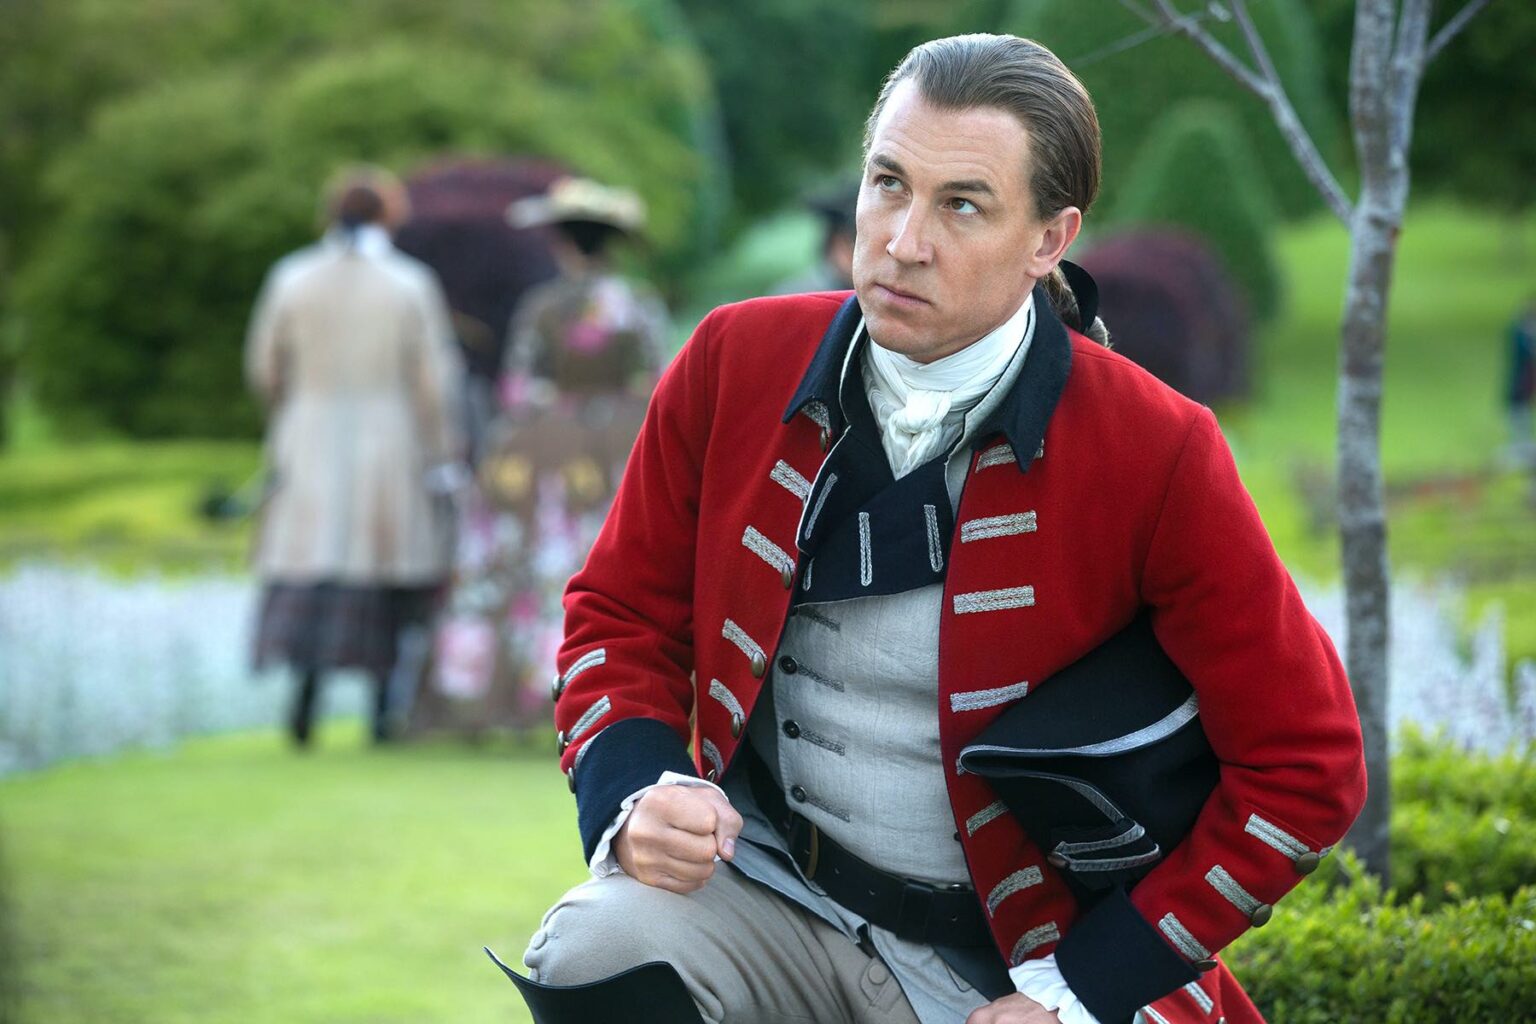 Fans of 'Outlander' likely feel their blood boil just hearing the name Captain Black Jack Randall. Here's why he's the worst villain to exist.